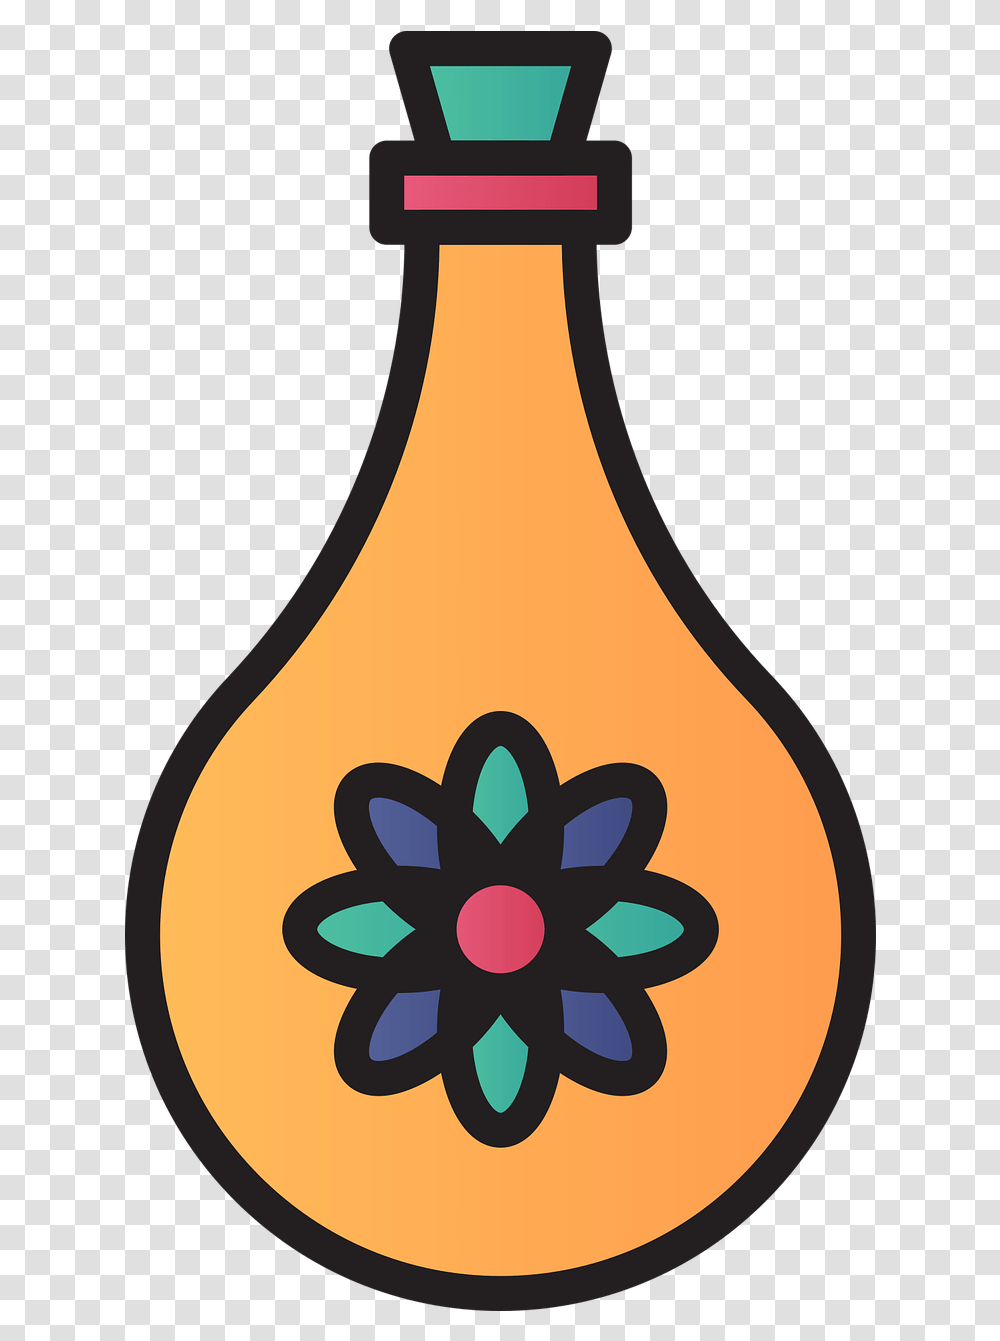 Essential Oil Bottle Icon Free Vector Graphic On Pixabay Lovely, Plant, Food, Fruit, Egg Transparent Png